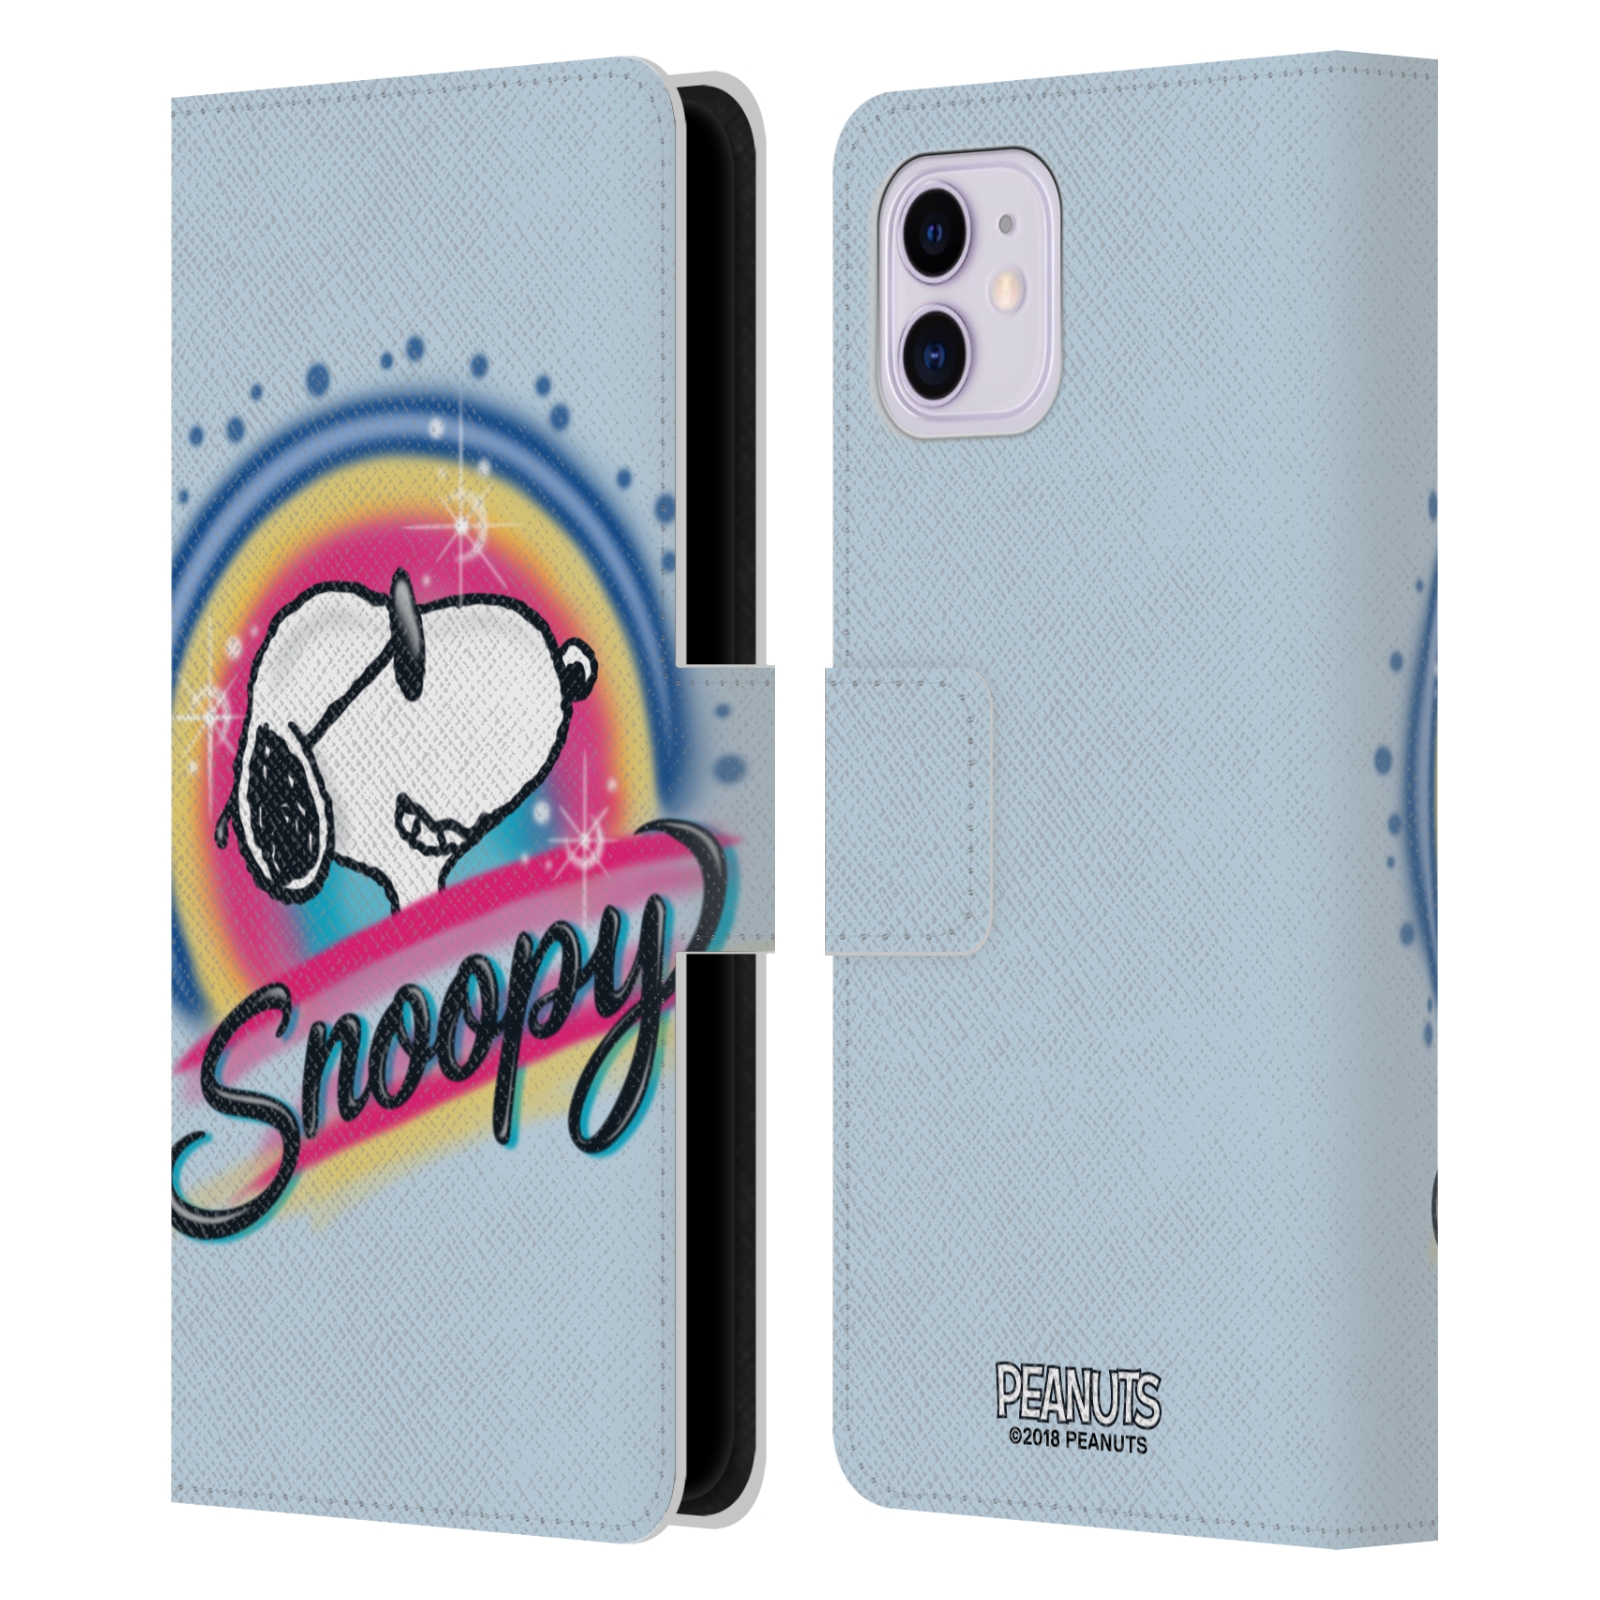 Pouzdro na mobil Apple Iphone 11 - HEAD CASE - Peanuts Snoopy Superstar 2